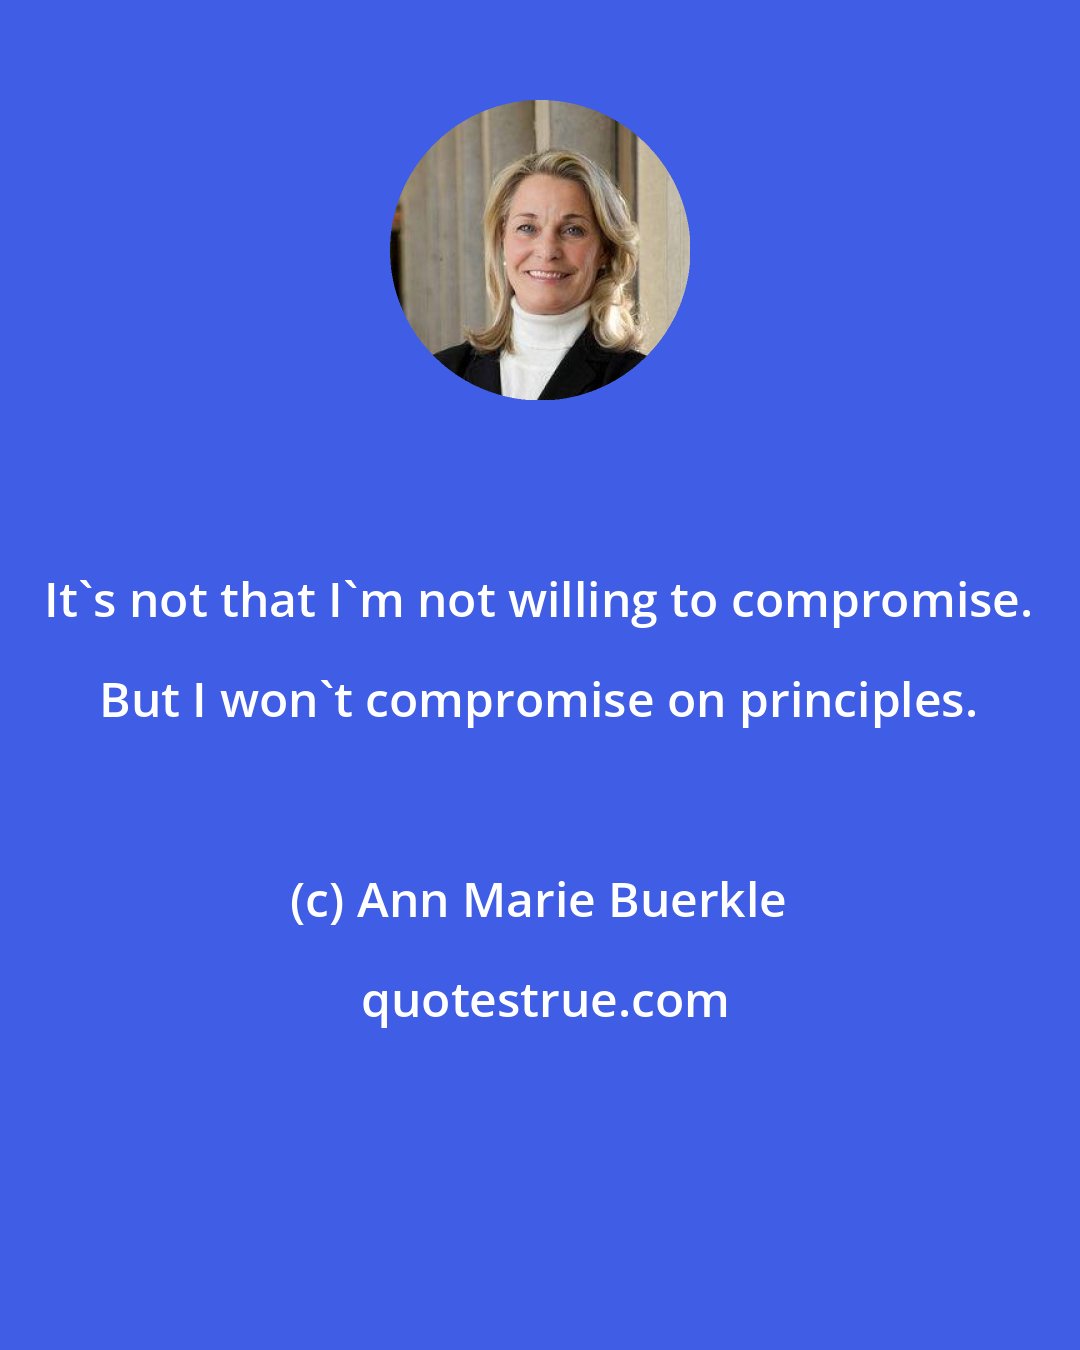 Ann Marie Buerkle: It's not that I'm not willing to compromise. But I won't compromise on principles.